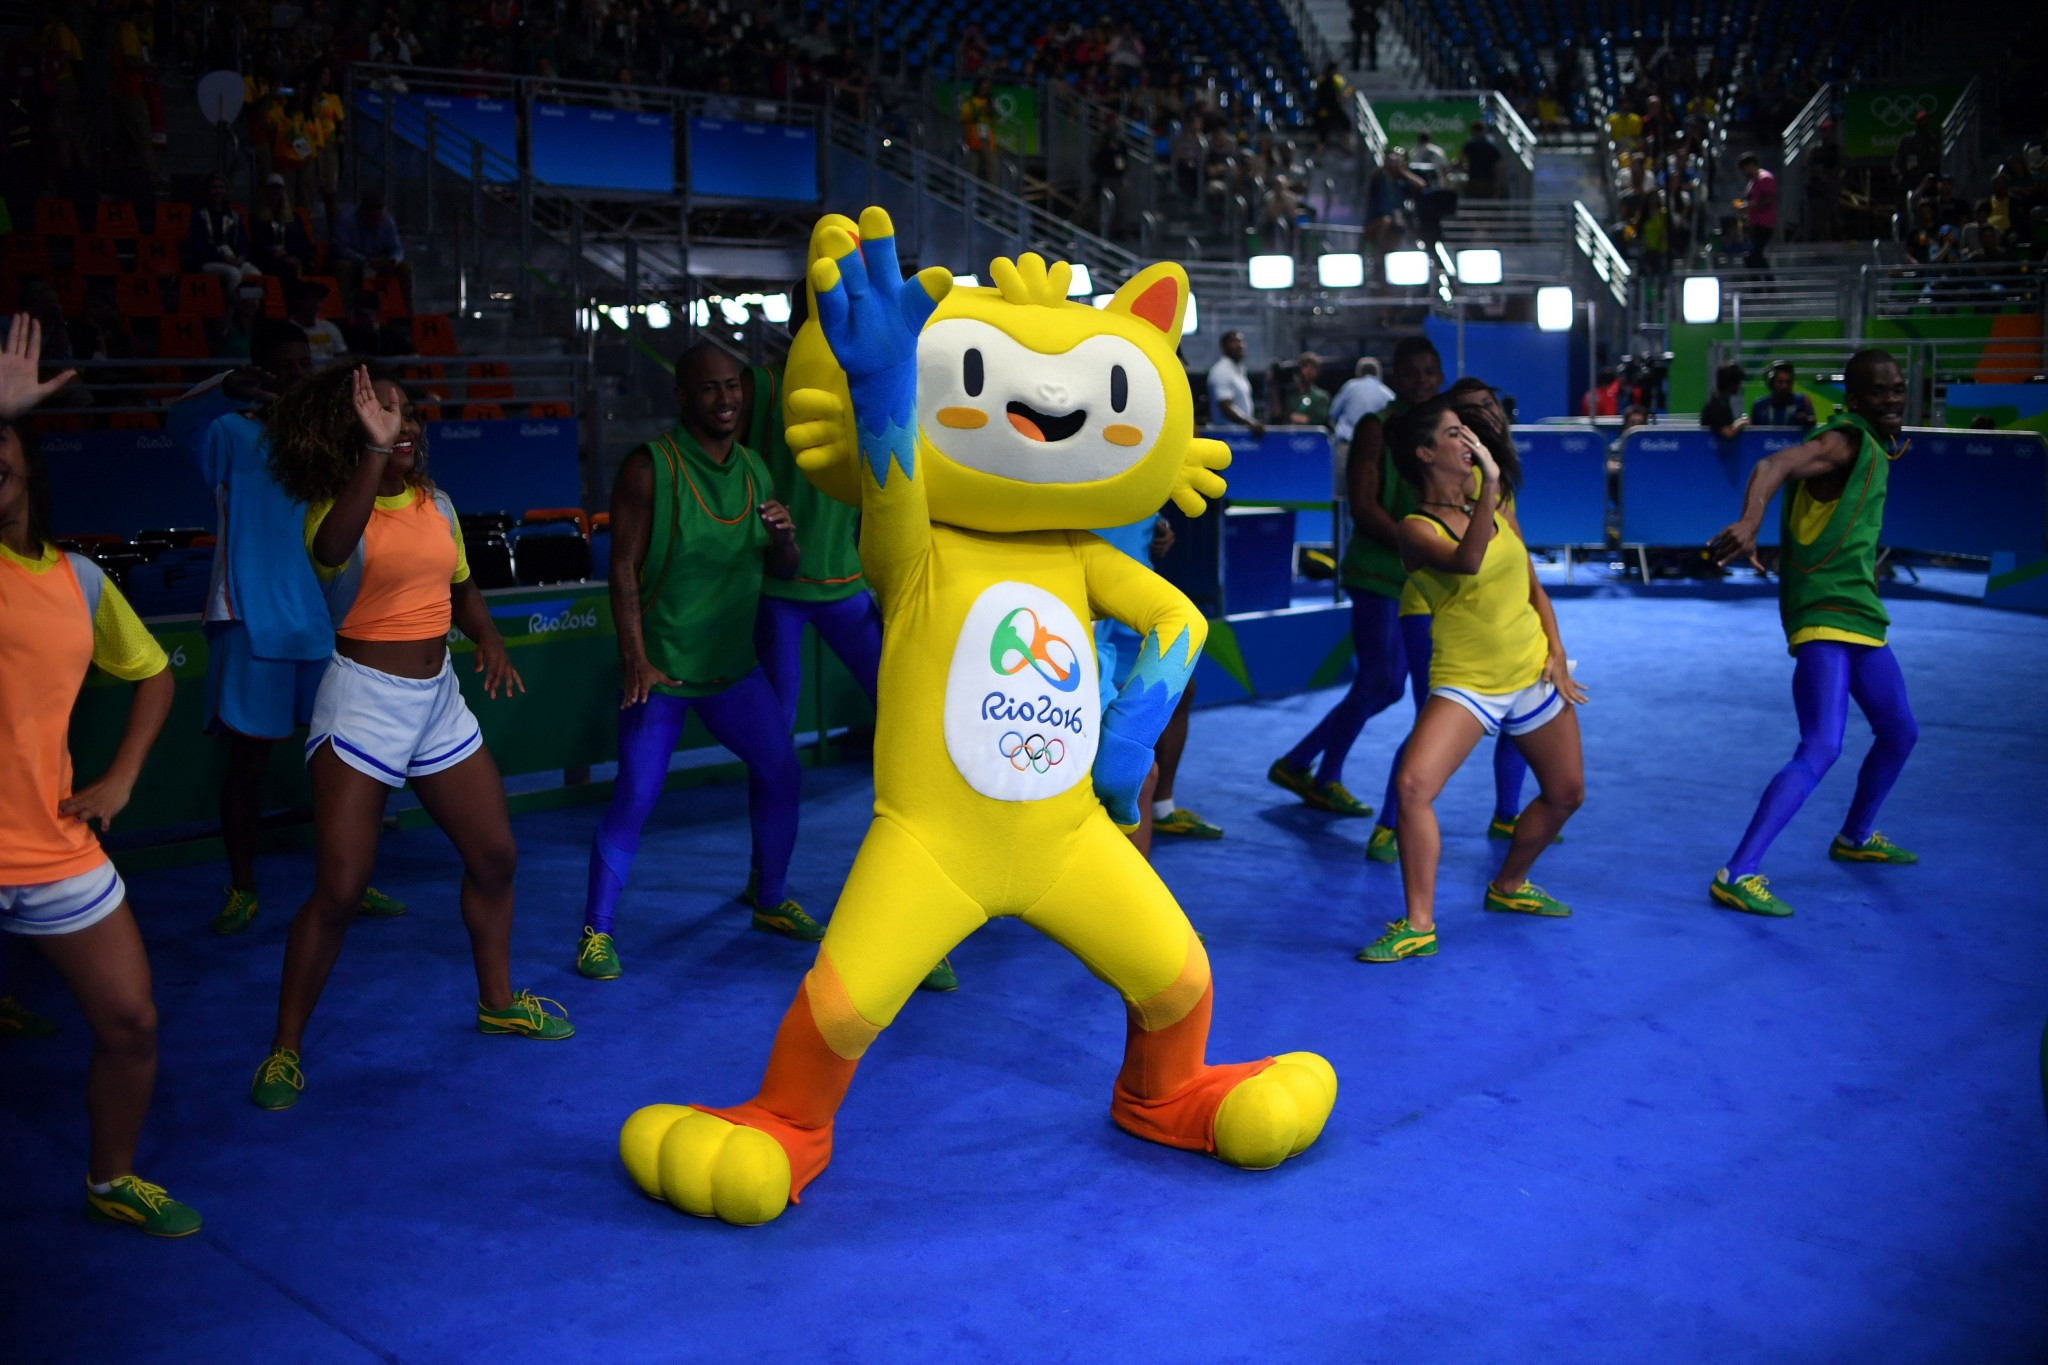 Vinicius was the mascot of the Rio 2016 Olympic Games ©Getty Images